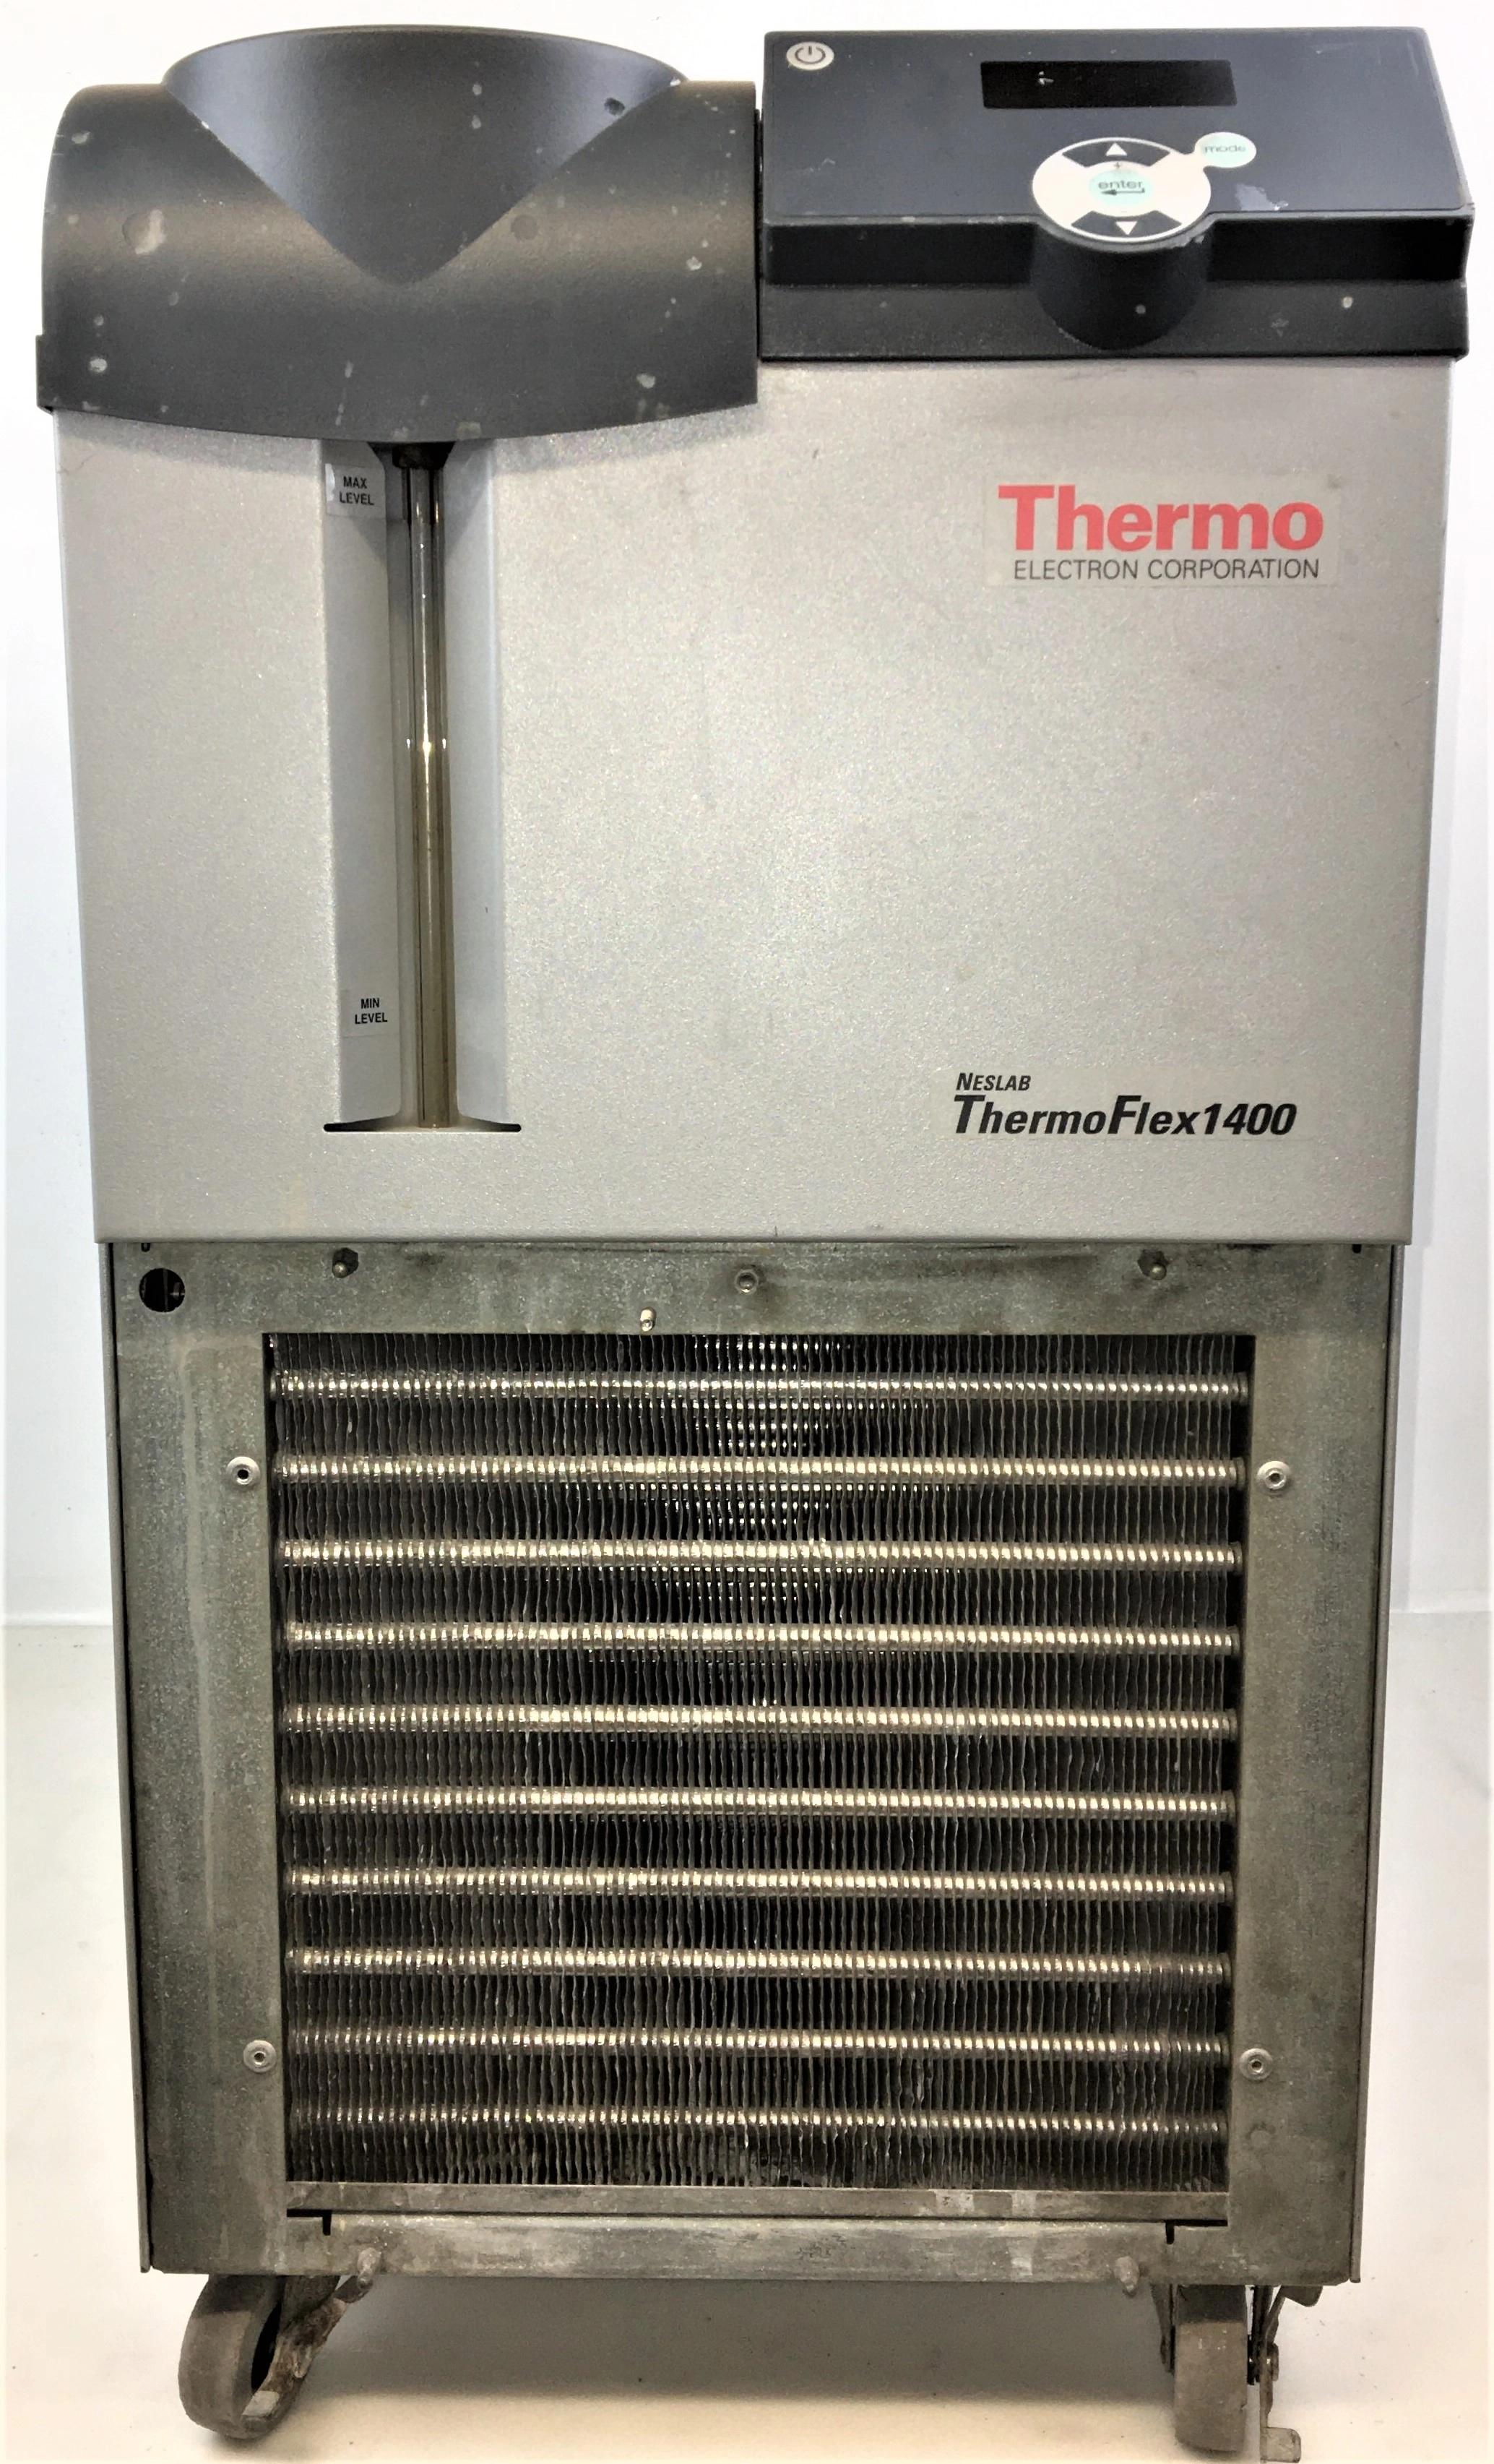 Thermo Electron ThermoFlex 1400 Recirculating Chiller